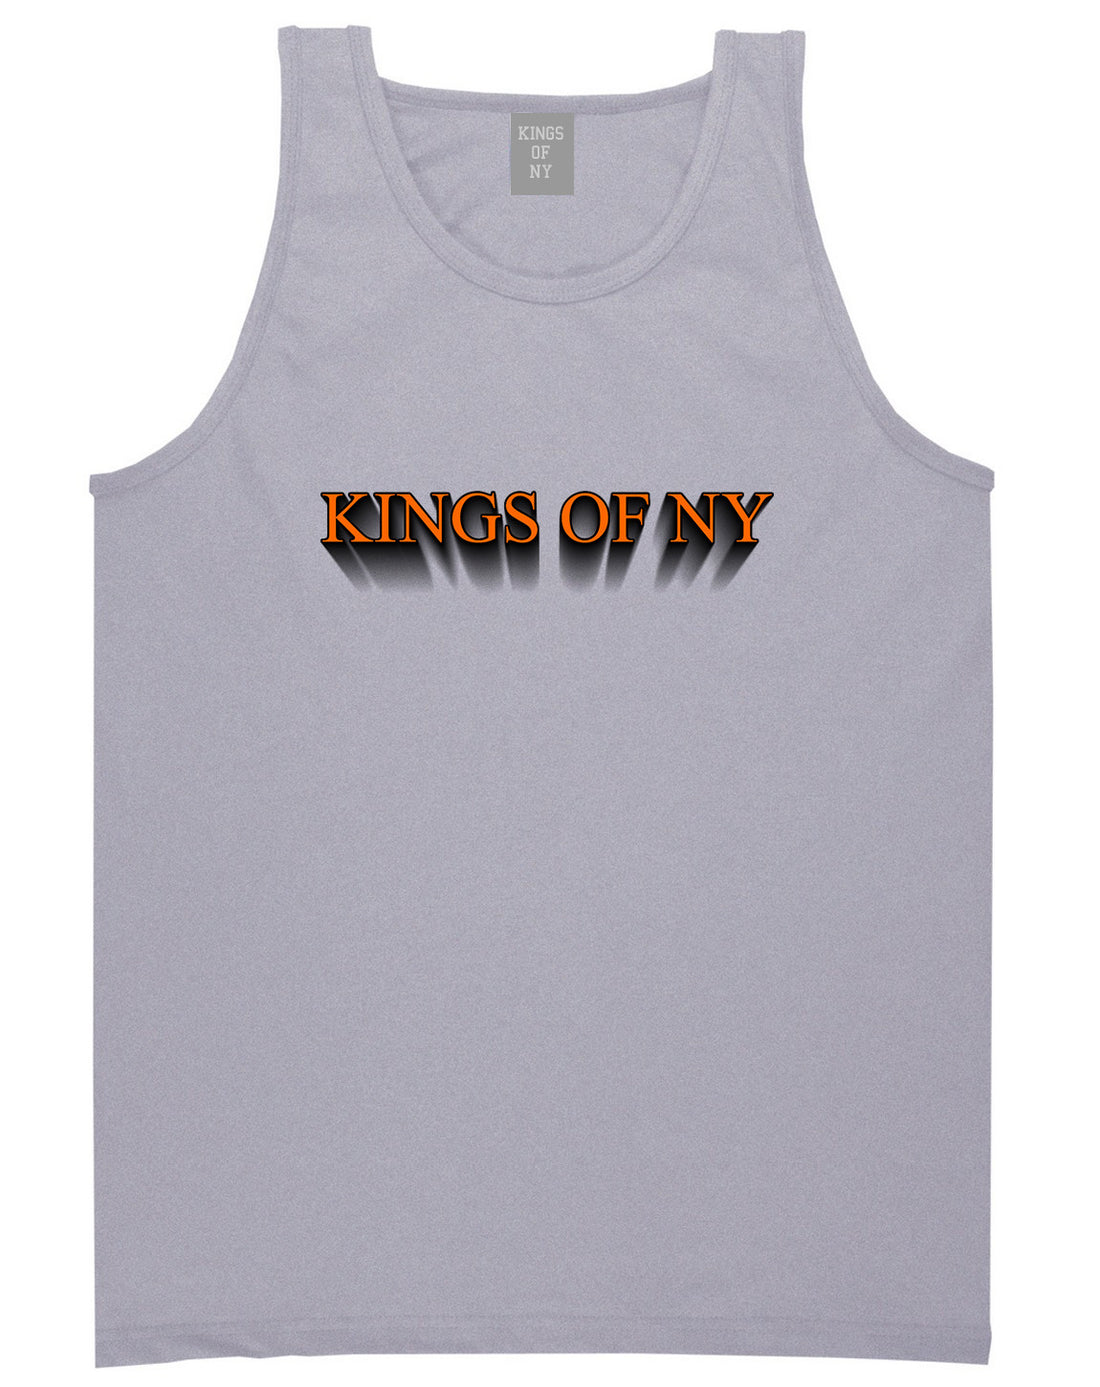 3D Text Tank Top in Grey